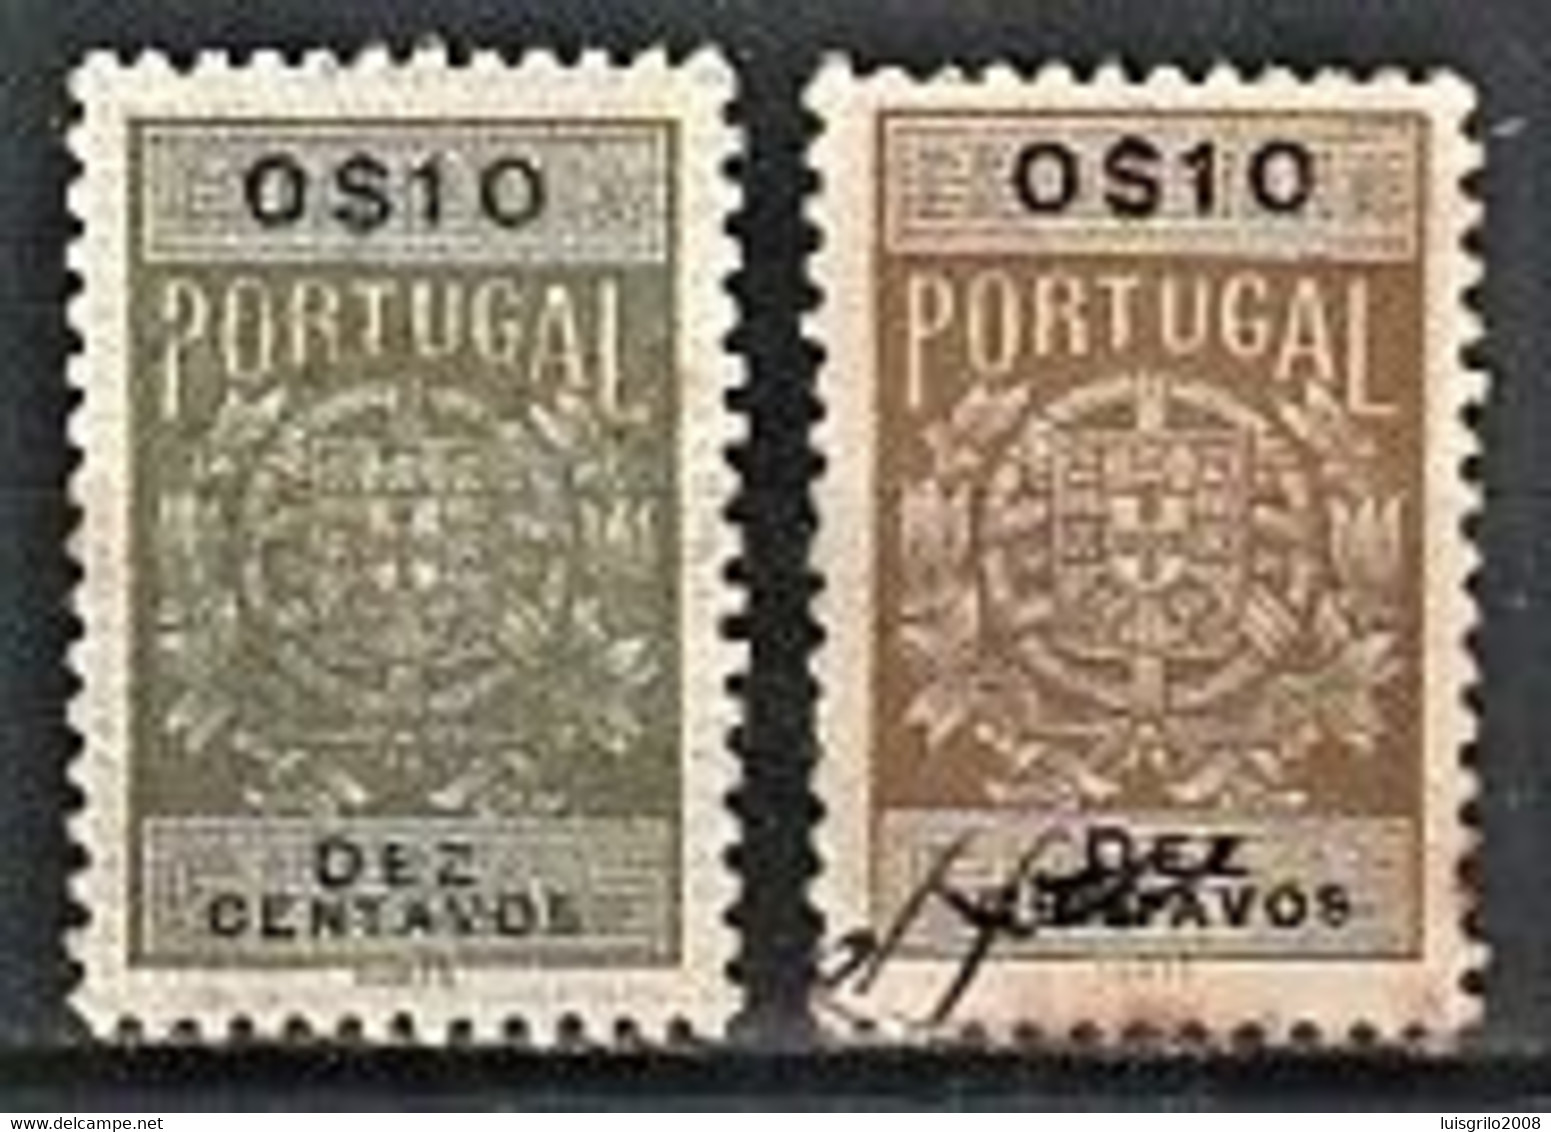 Fiscal/ Revenue, Portugal 1940 - Estampilha Fiscal -|- 0$10 - COLOR VARIANT - Is The Stamp Of The Right - Used Stamps